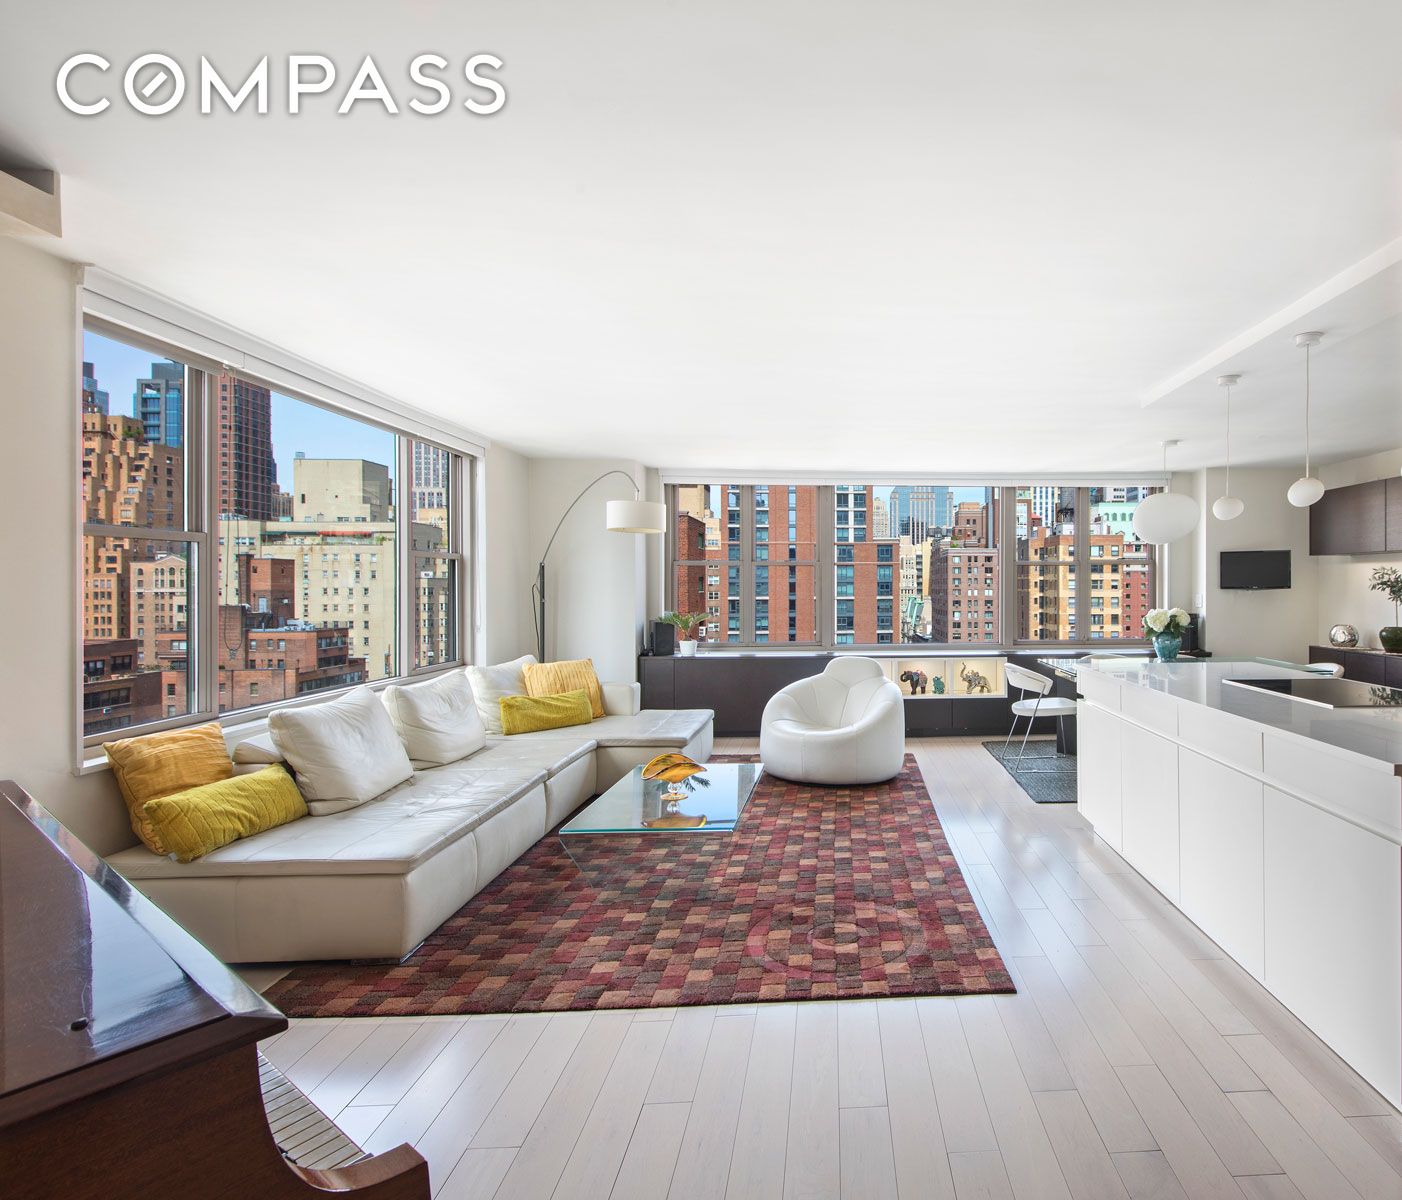 137 East 36th Street 15F, Murray Hill, Midtown East, NYC - 2 Bedrooms  
2.5 Bathrooms  
5 Rooms - 